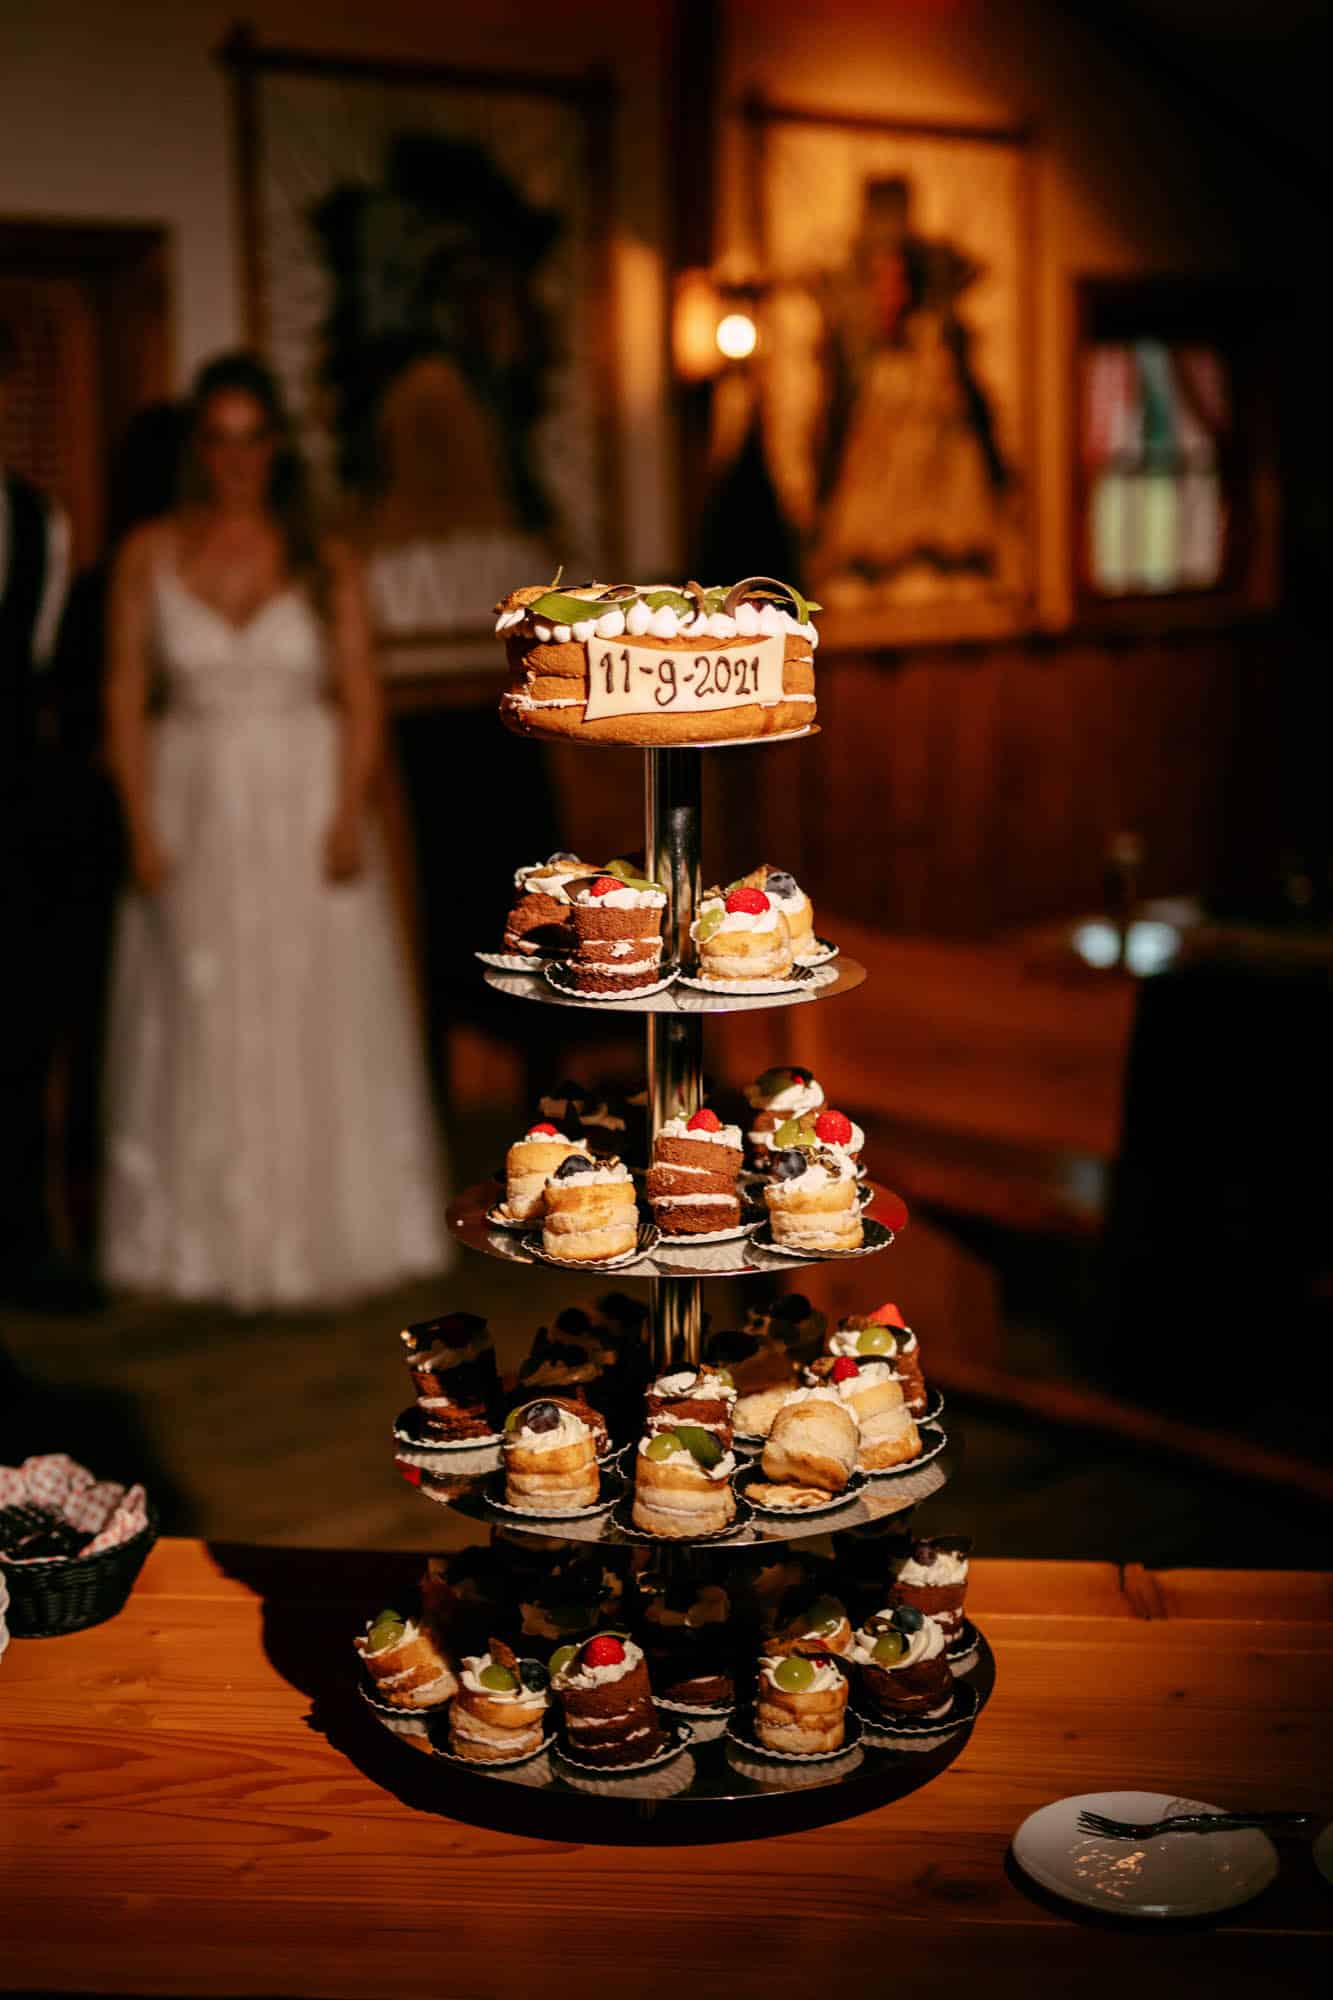 cakes formed as wedding cake